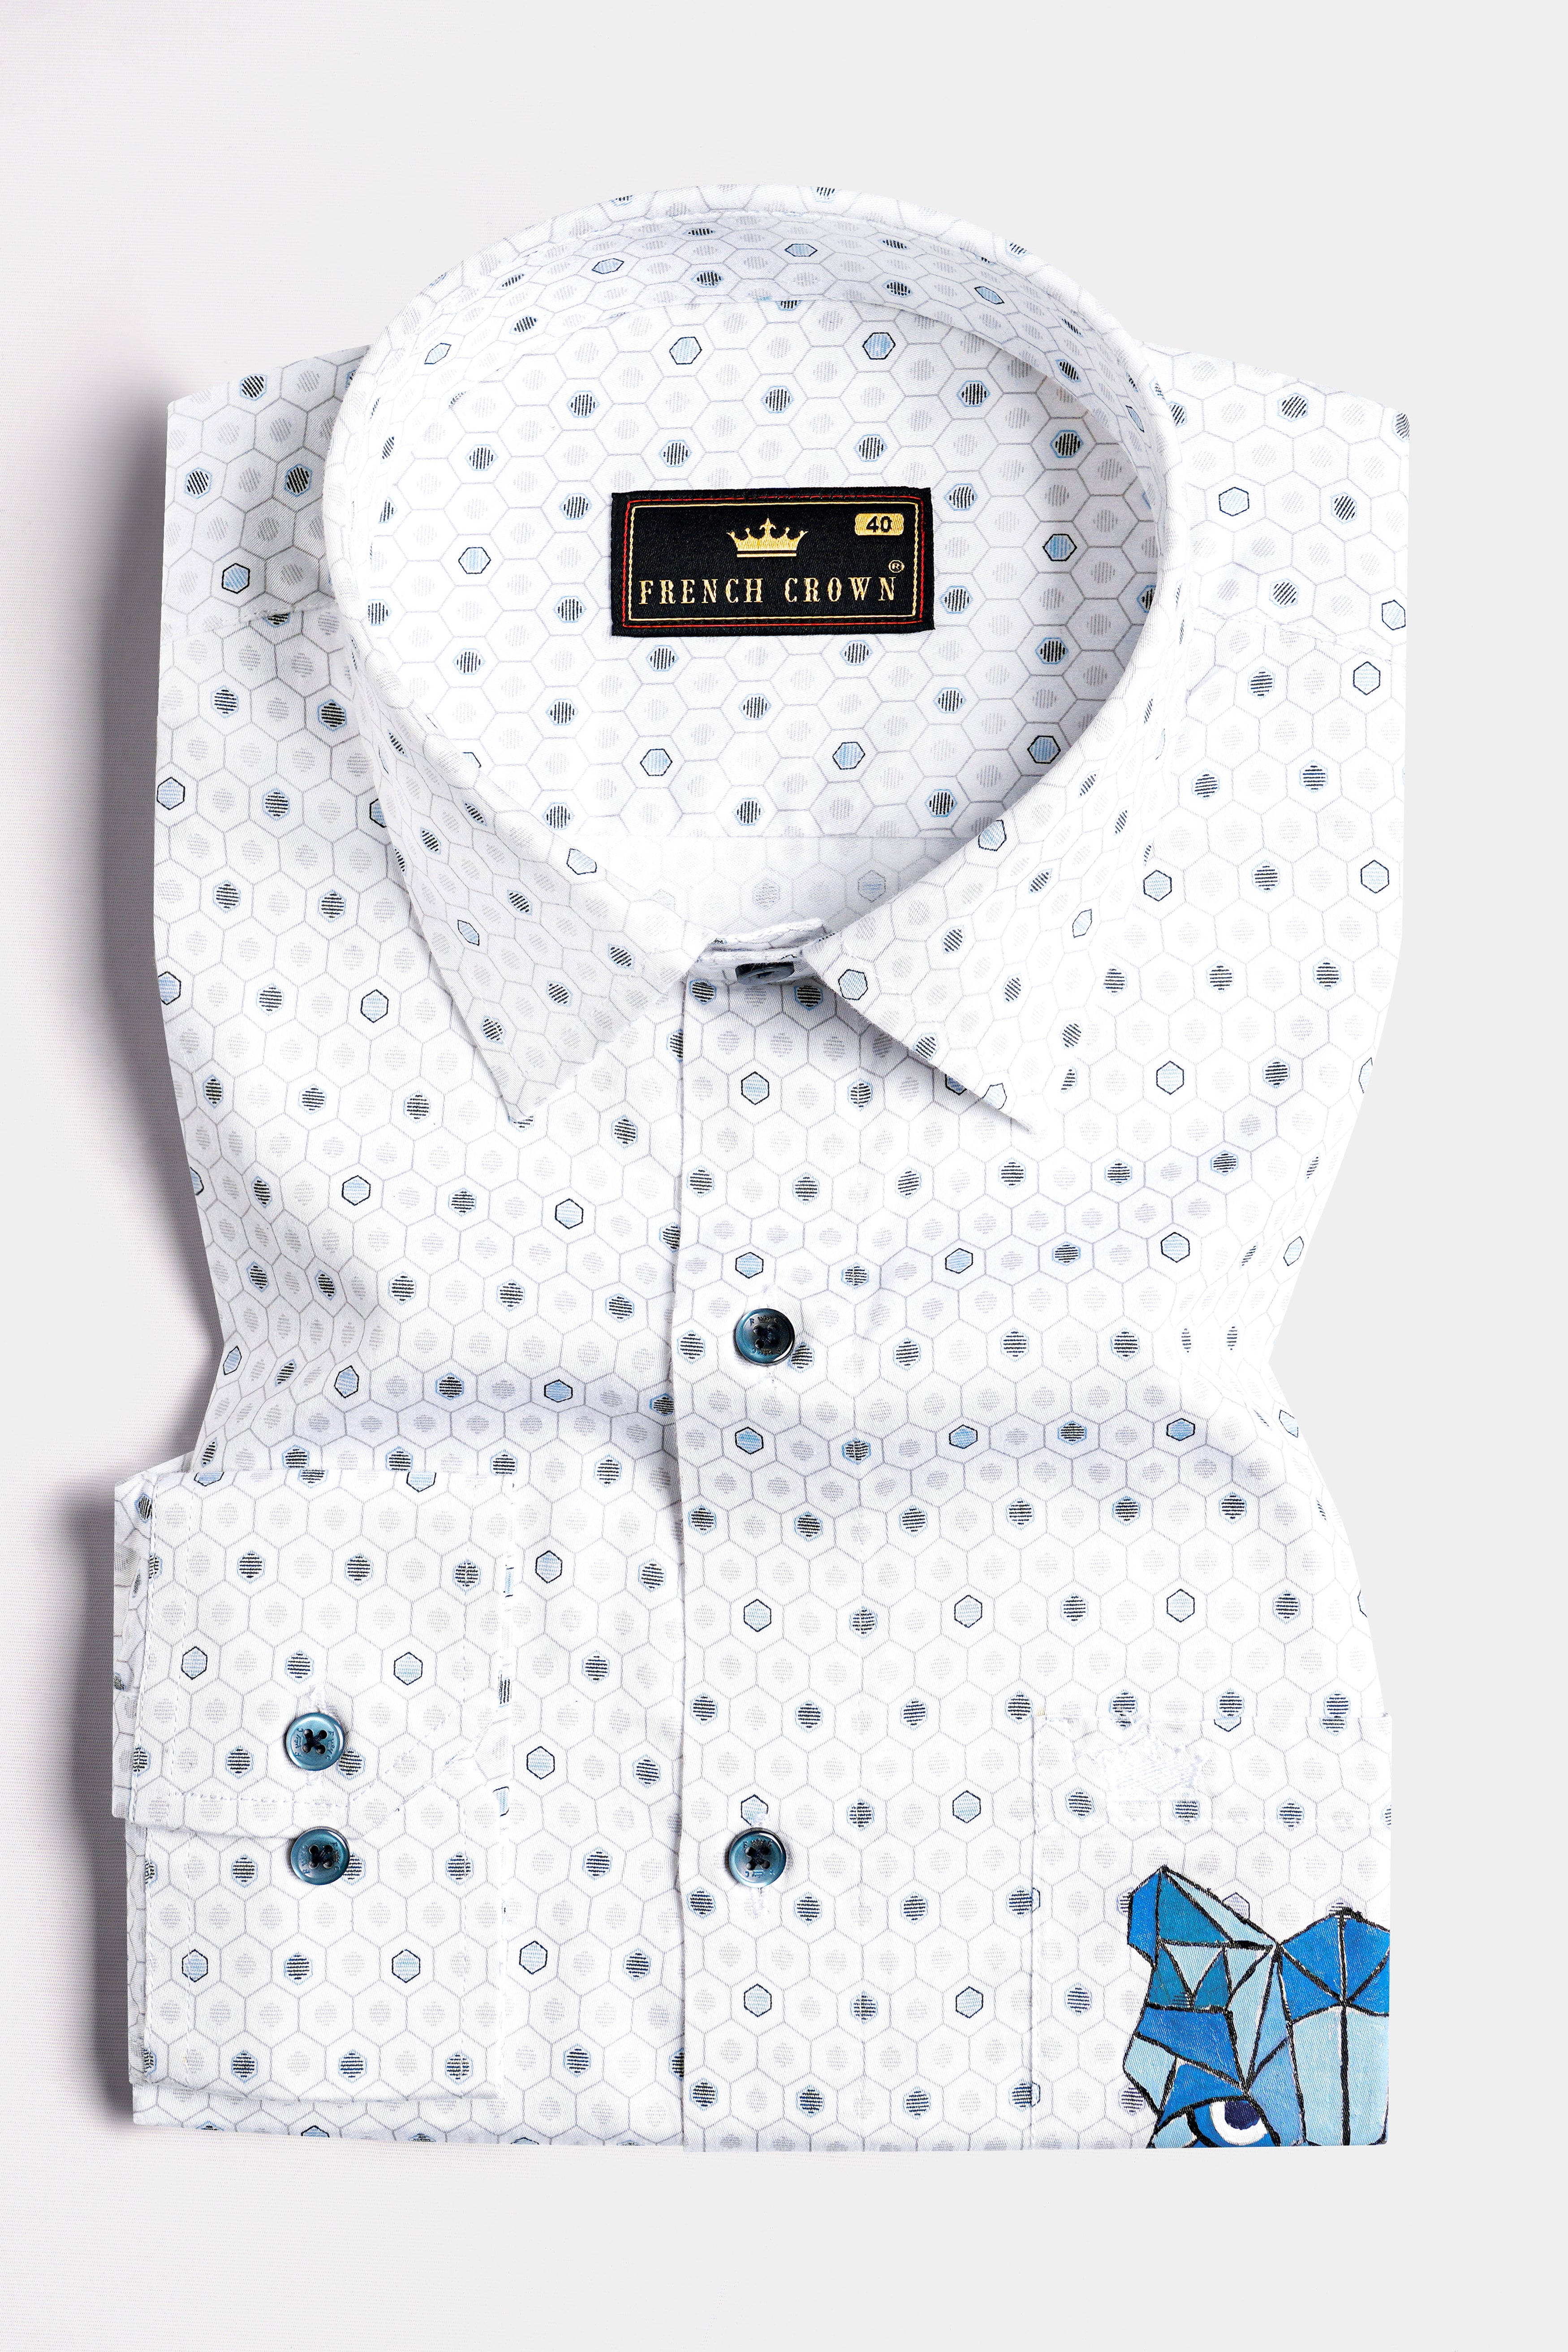 Bright White with Gull Blue Printed and Hand Painted Super Soft Premium Cotton Designer Shirt 6291-BLE-ART-38, 6291-BLE-ART-H-38, 6291-BLE-ART-39, 6291-BLE-ART-H-39, 6291-BLE-ART-40, 6291-BLE-ART-H-40, 6291-BLE-ART-42, 6291-BLE-ART-H-42, 6291-BLE-ART-44, 6291-BLE-ART-H-44, 6291-BLE-ART-46, 6291-BLE-ART-H-46, 6291-BLE-ART-48, 6291-BLE-ART-H-48, 6291-BLE-ART-50, 6291-BLE-ART-H-50, 6291-BLE-ART-52, 6291-BLE-ART-H-52